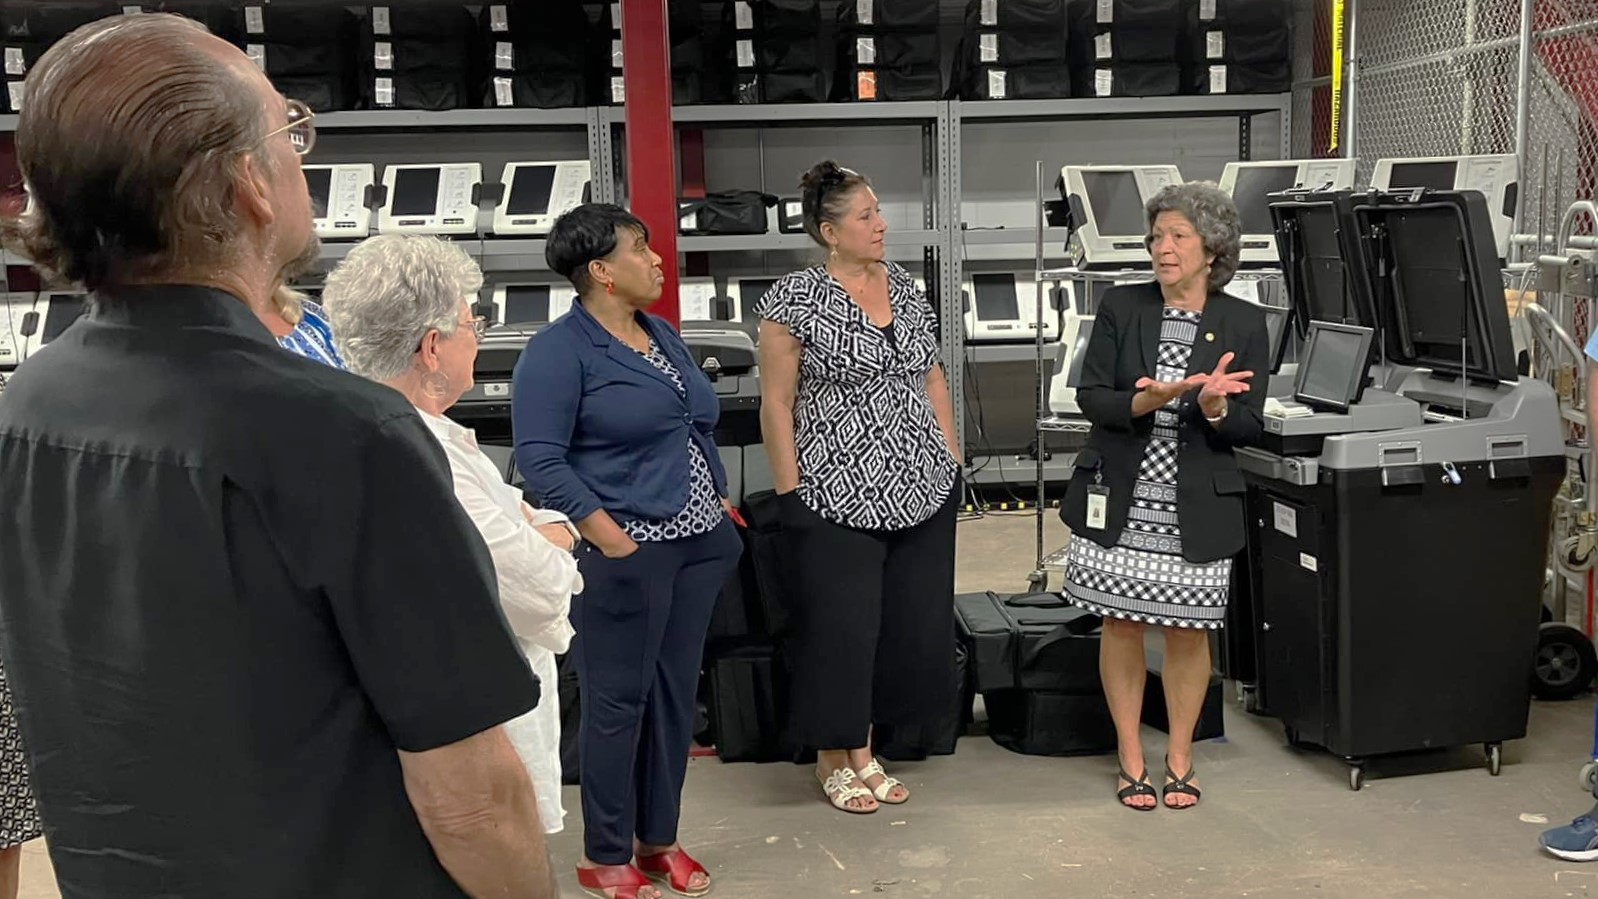 St. Johns County Supervisor of Elections Vicky Oakes, right, speaks to staff in 2022. | St. Johns County Supervisor of Elections